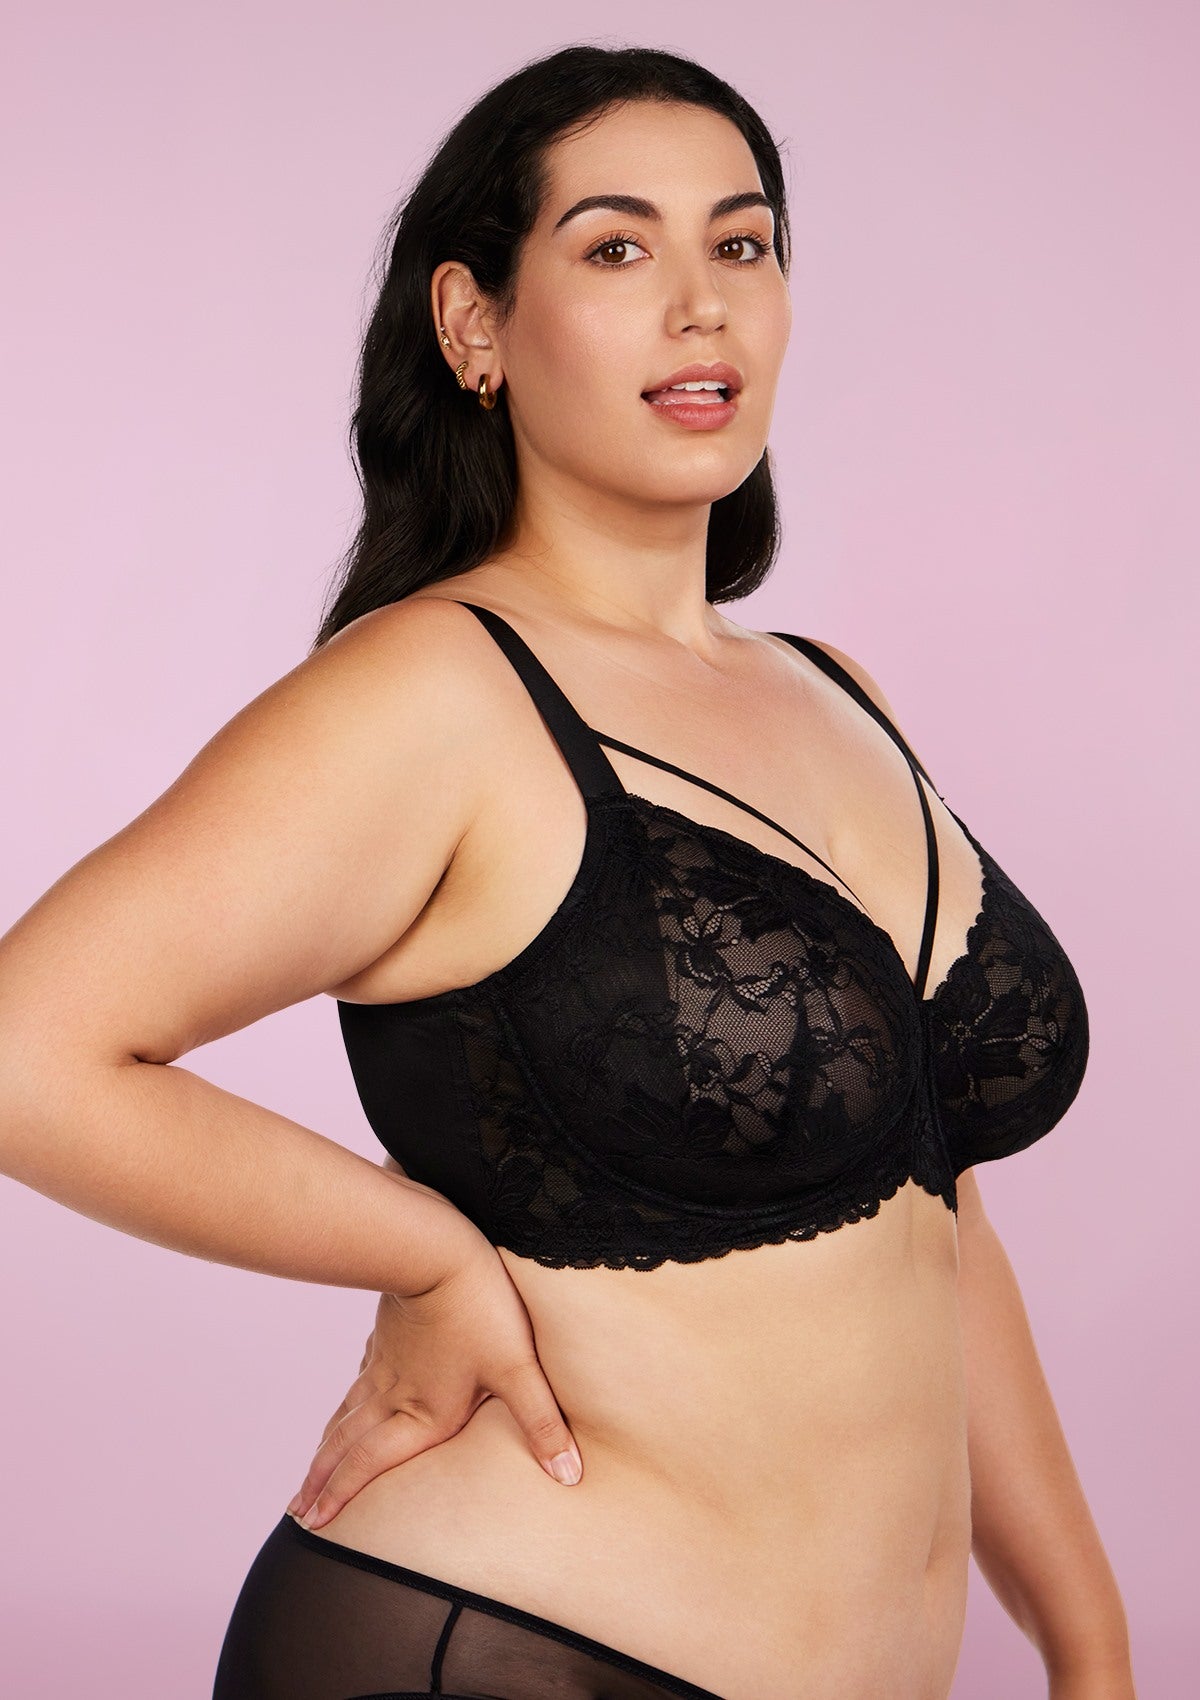 HSIA Pretty In Petals Lace Bra And Panty Set: Non Padded Wired Bra - Black / 42 / C